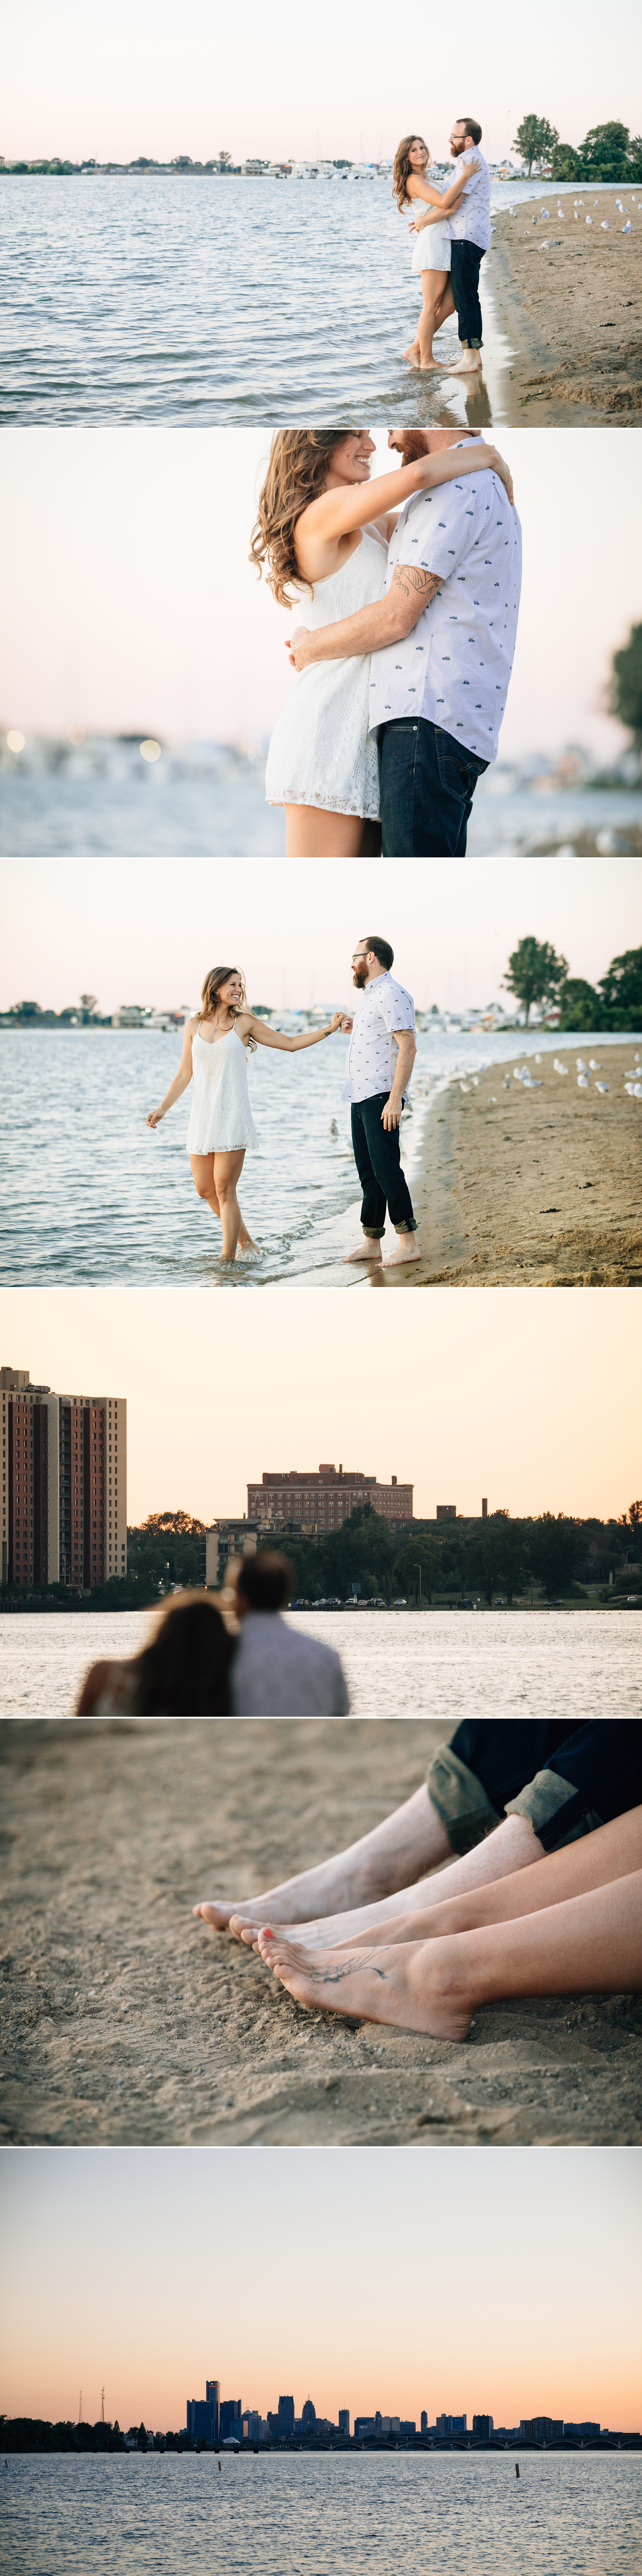 Man and woman on the beach at Belle Isle in Detroit